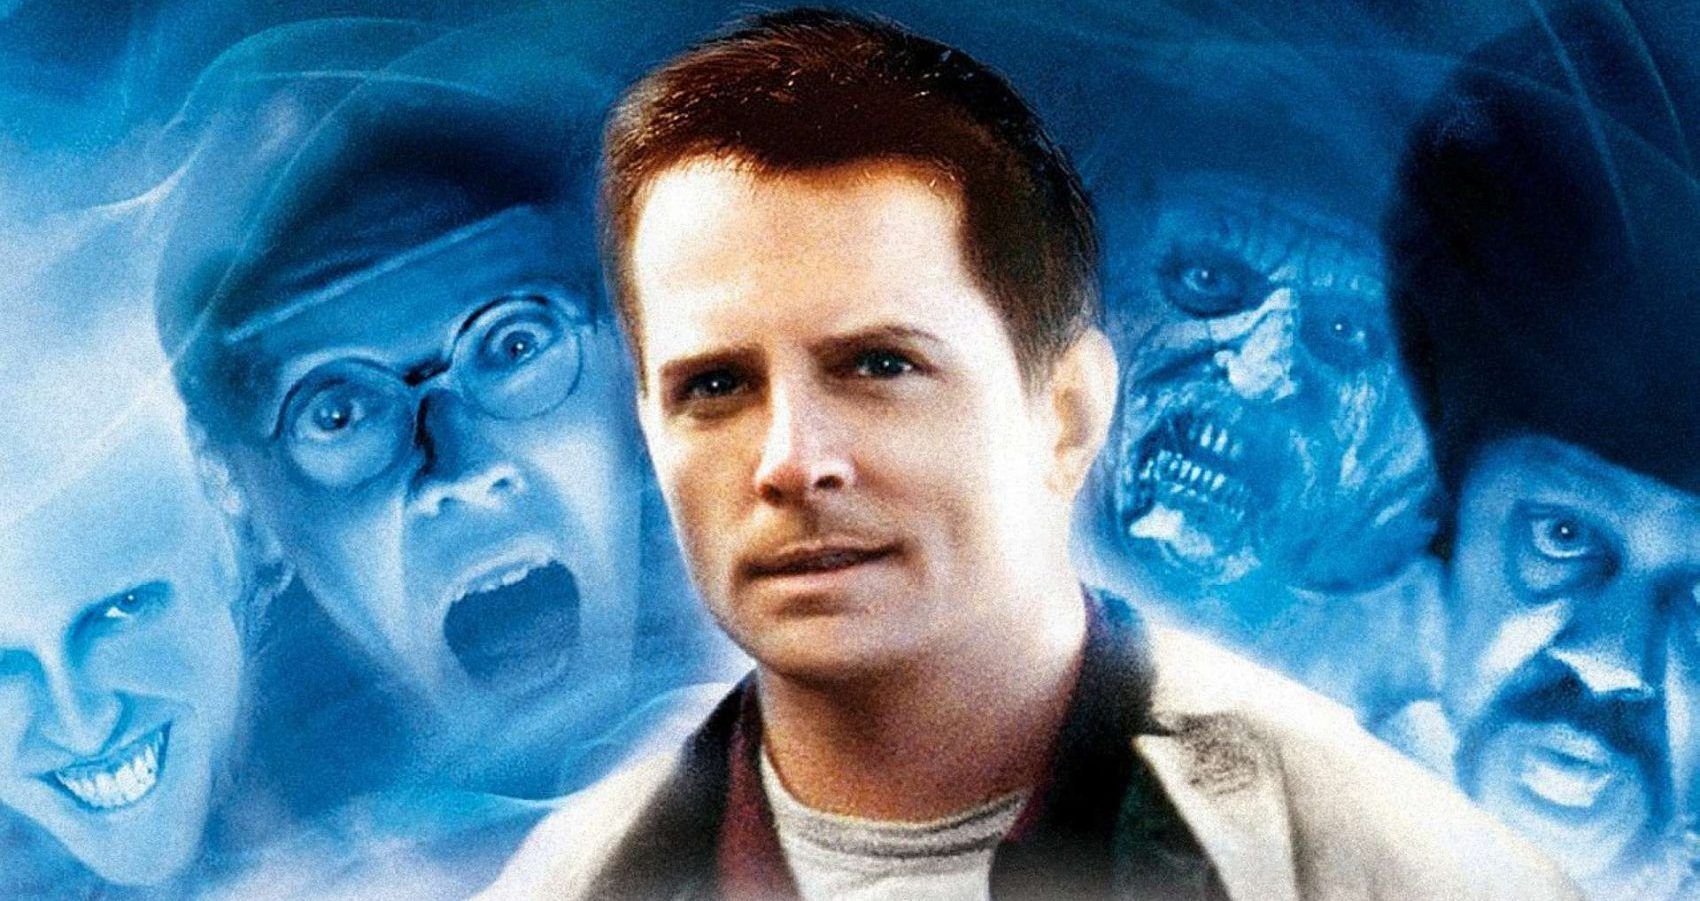 10 Paranormal Comedies To Watch If You Love Ghostbusters